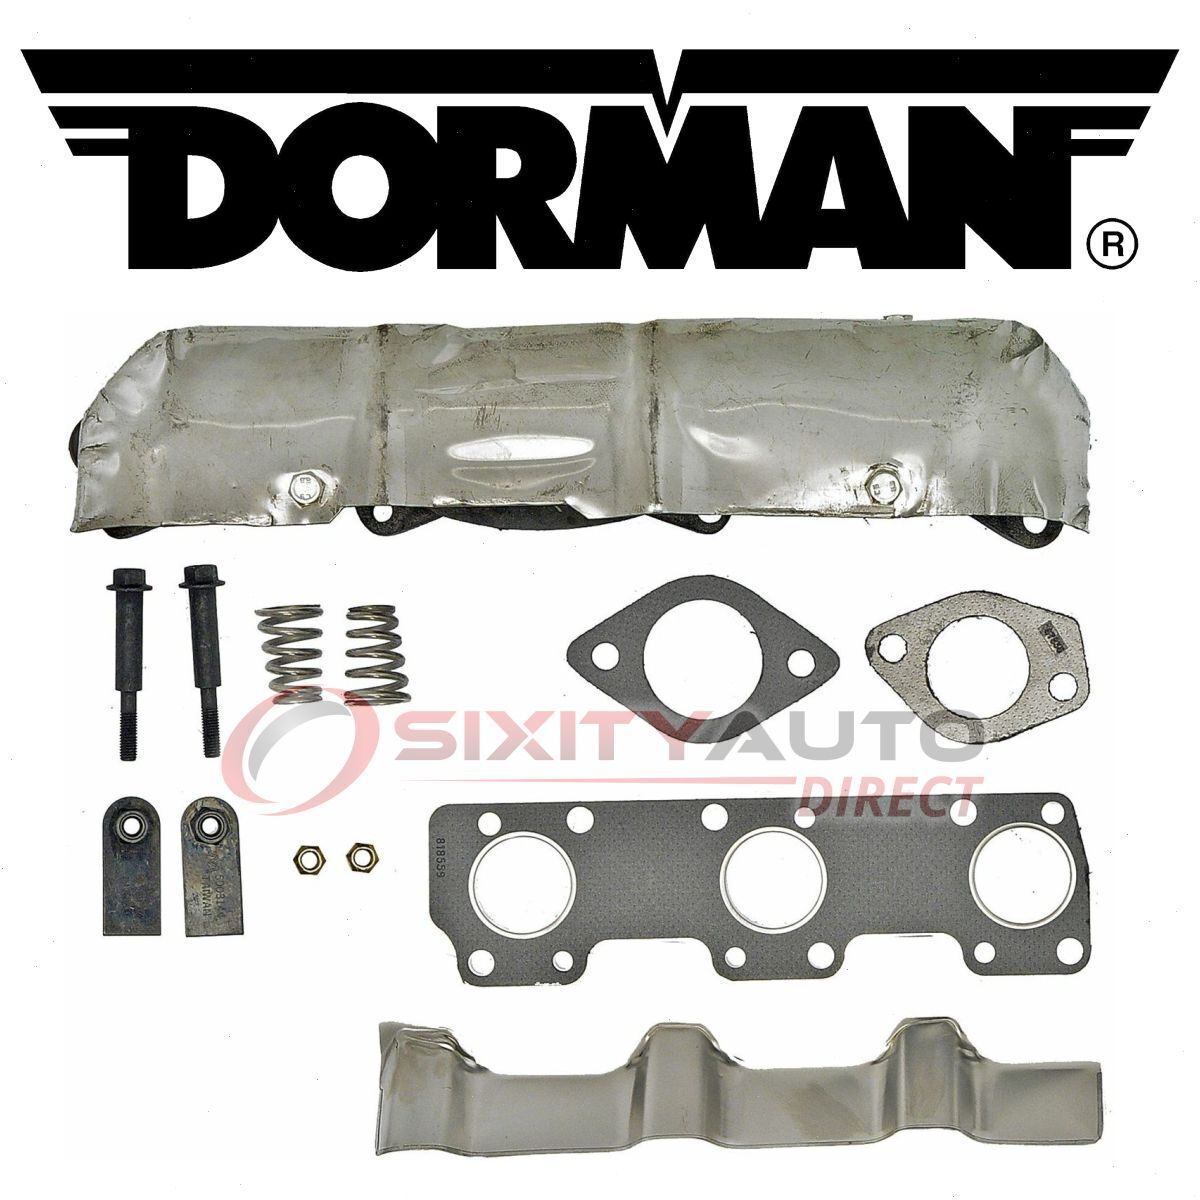 Dorman Front Exhaust Manifold for 1989-1995 Plymouth Acclaim 3.0L V6 kv